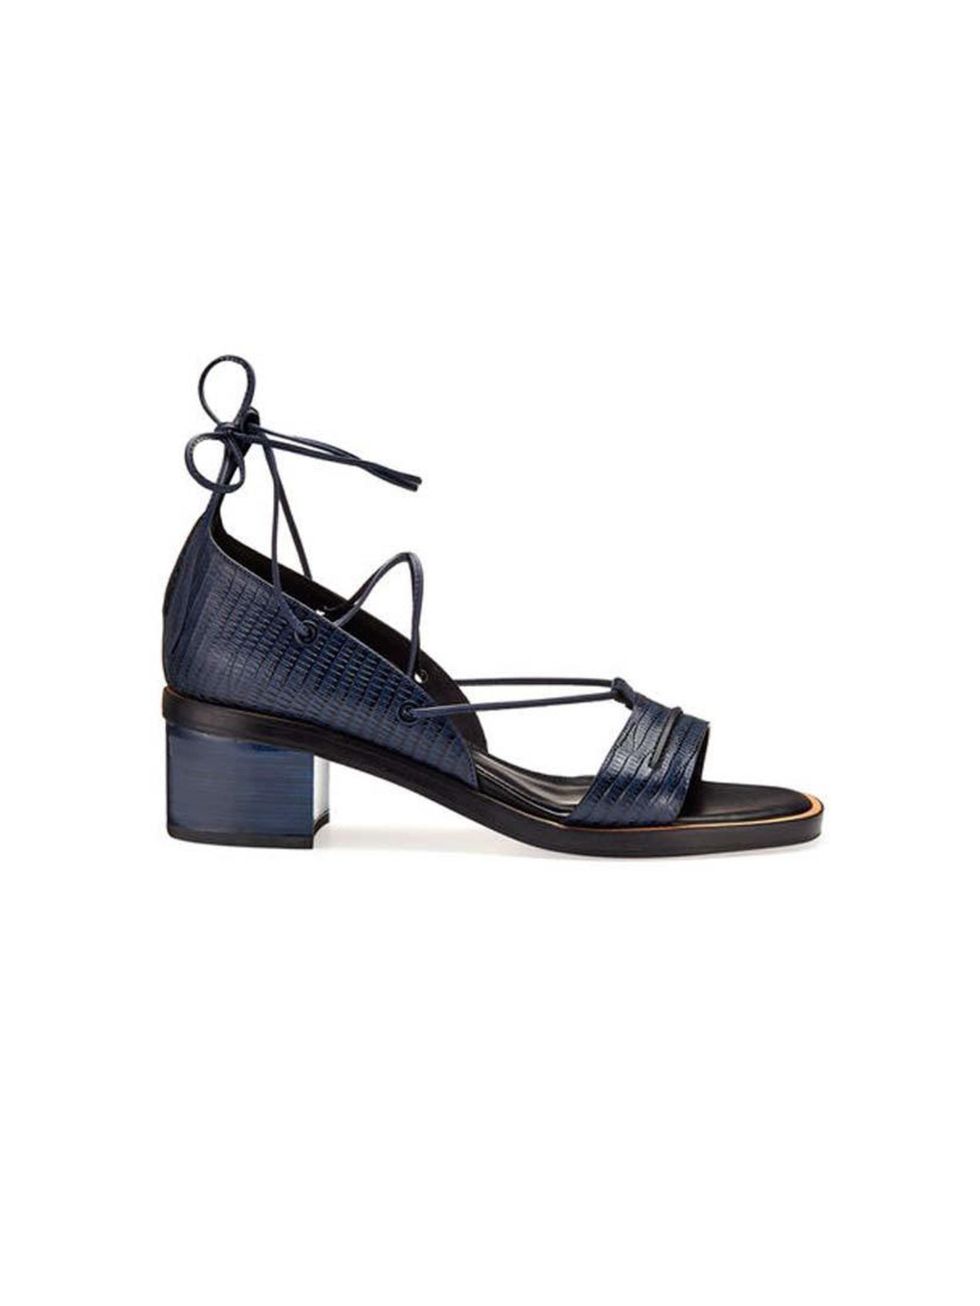 <p>Pair with culottes to show off all that ankle-strap action.</p>

<p><a href="http://www.whistles.com/women/shoes/sandals/nevine-two-part-lacing-sandal-20498.html?dwvar_nevine-two-part-lacing-sandal-20498_color=Navy" target="_blank">Whistles</a> sandals